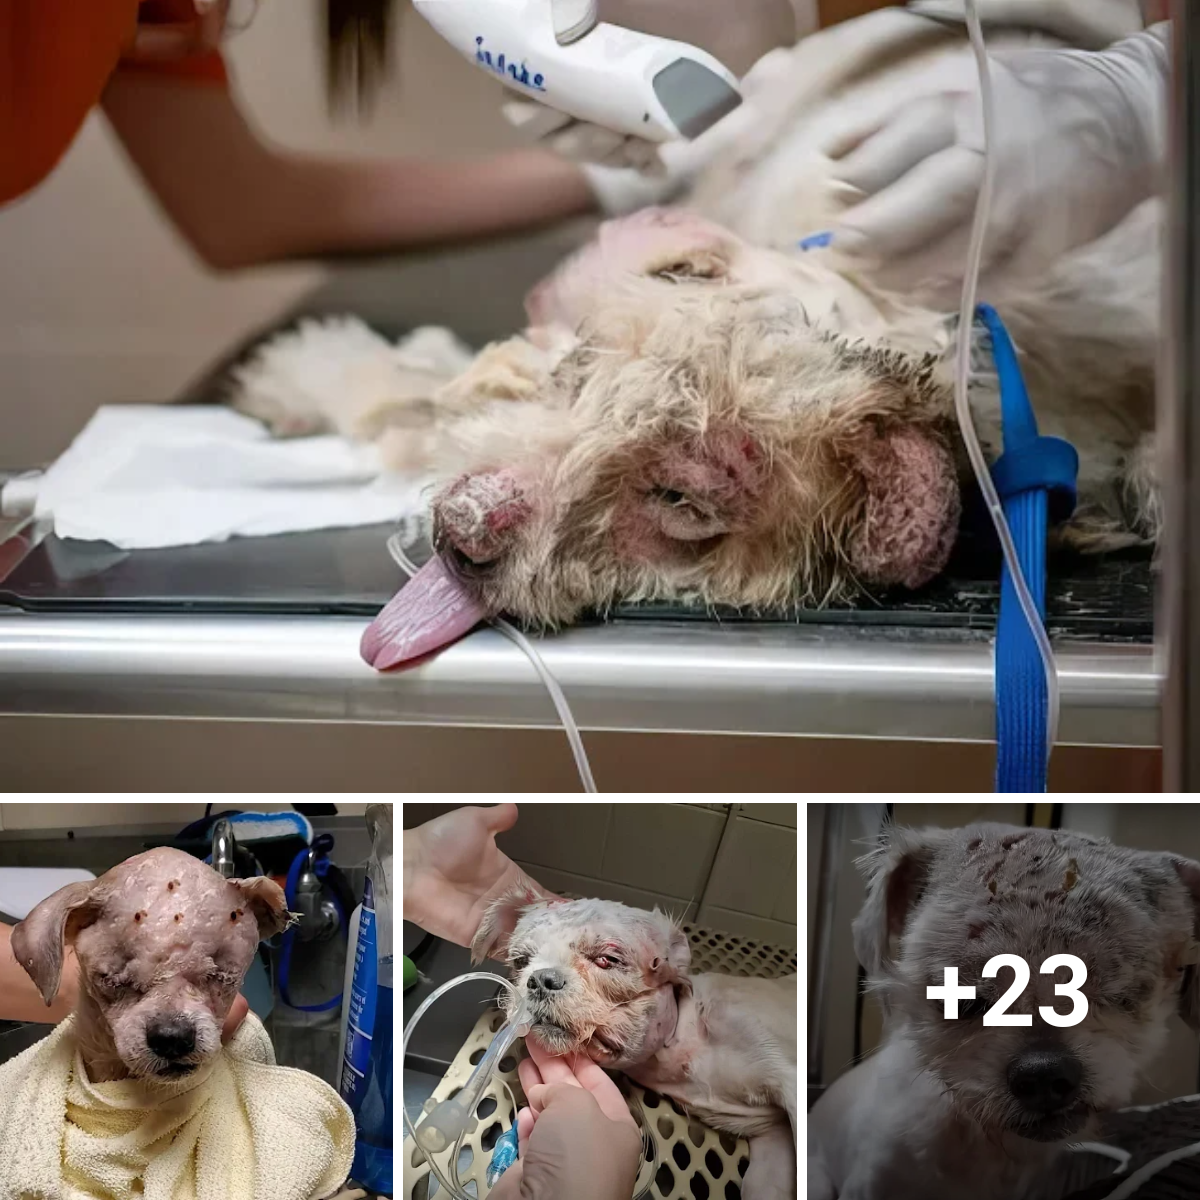 Luckily, we were able to save him from critical condition after saving him from terrible burns and deformities. Let’s wish our dog good health.